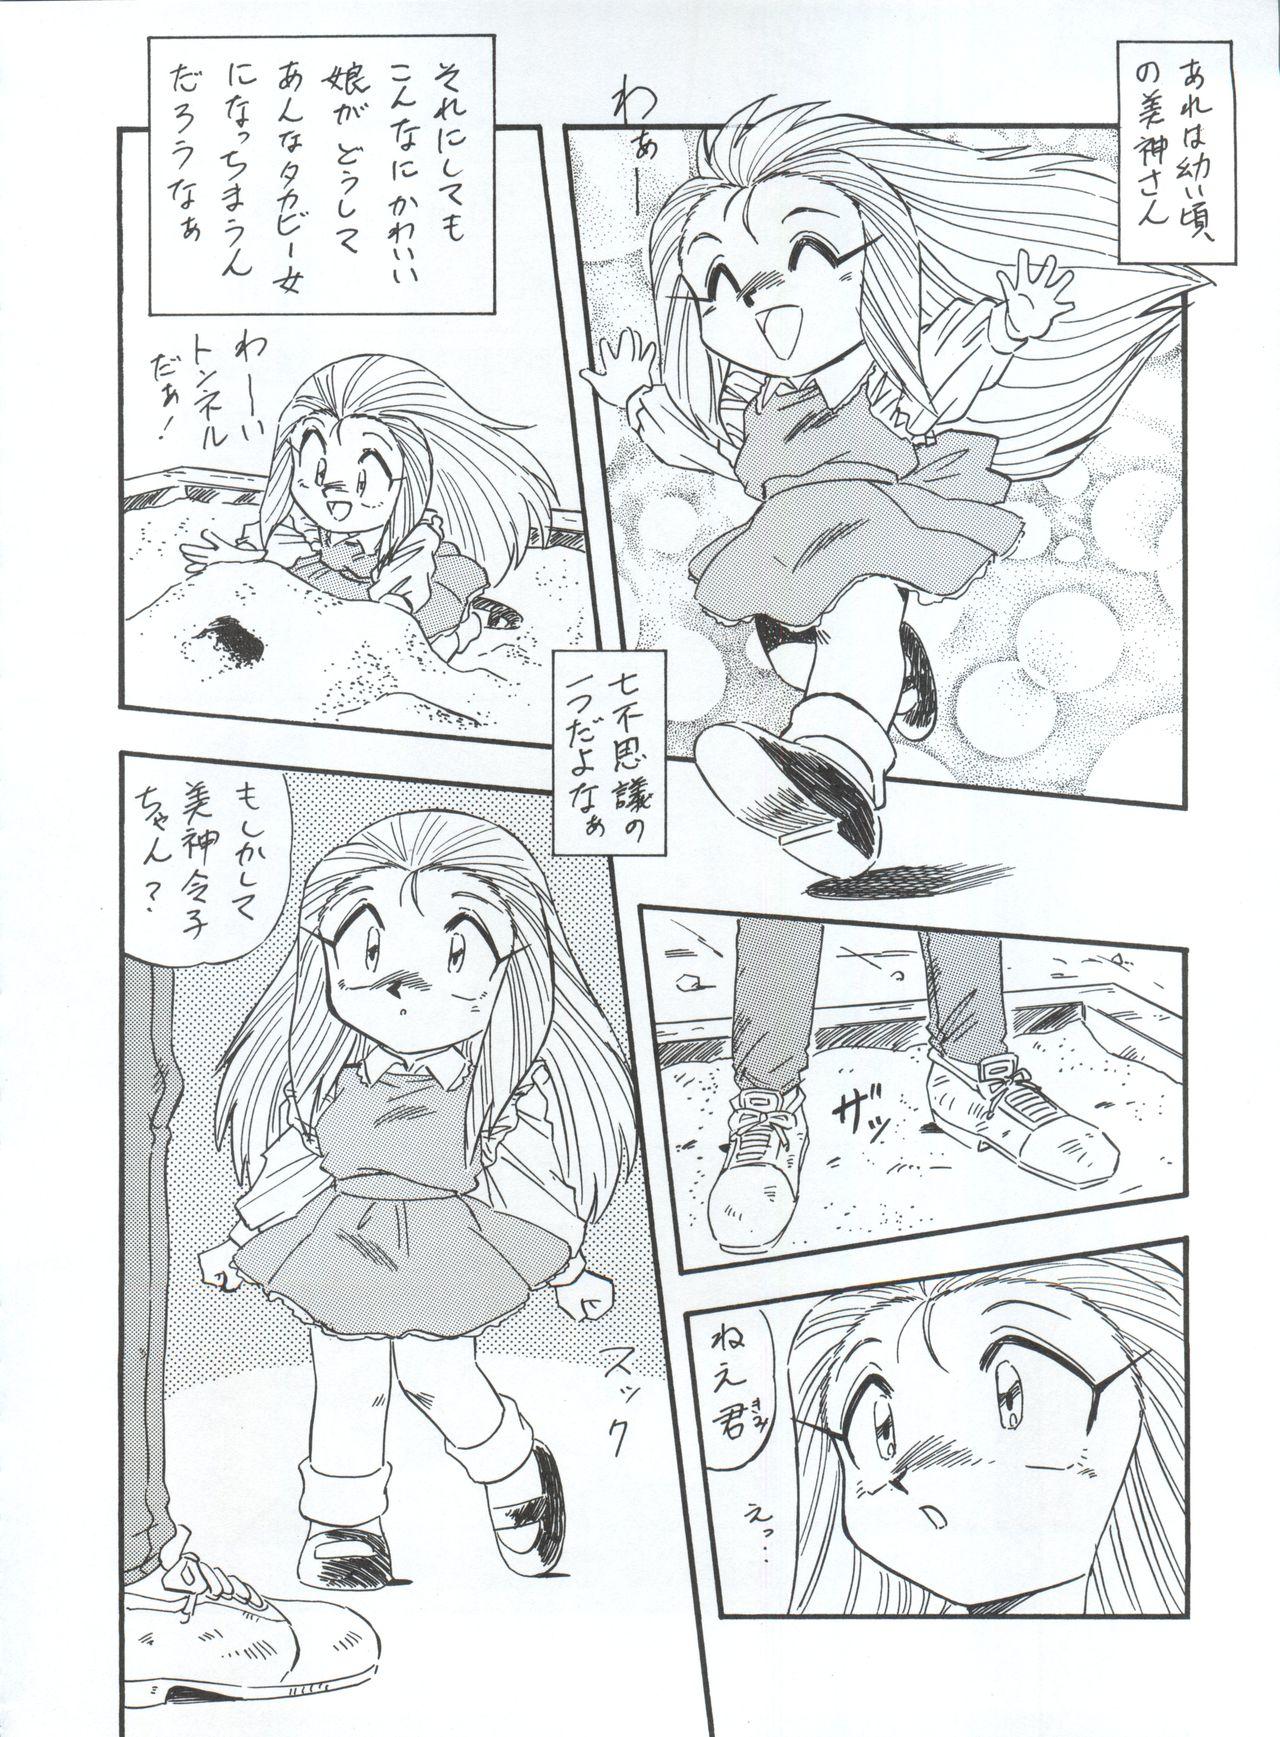 Tetona LOOK OUT 34 - Sailor moon Ghost sweeper mikami Deep - Page 10